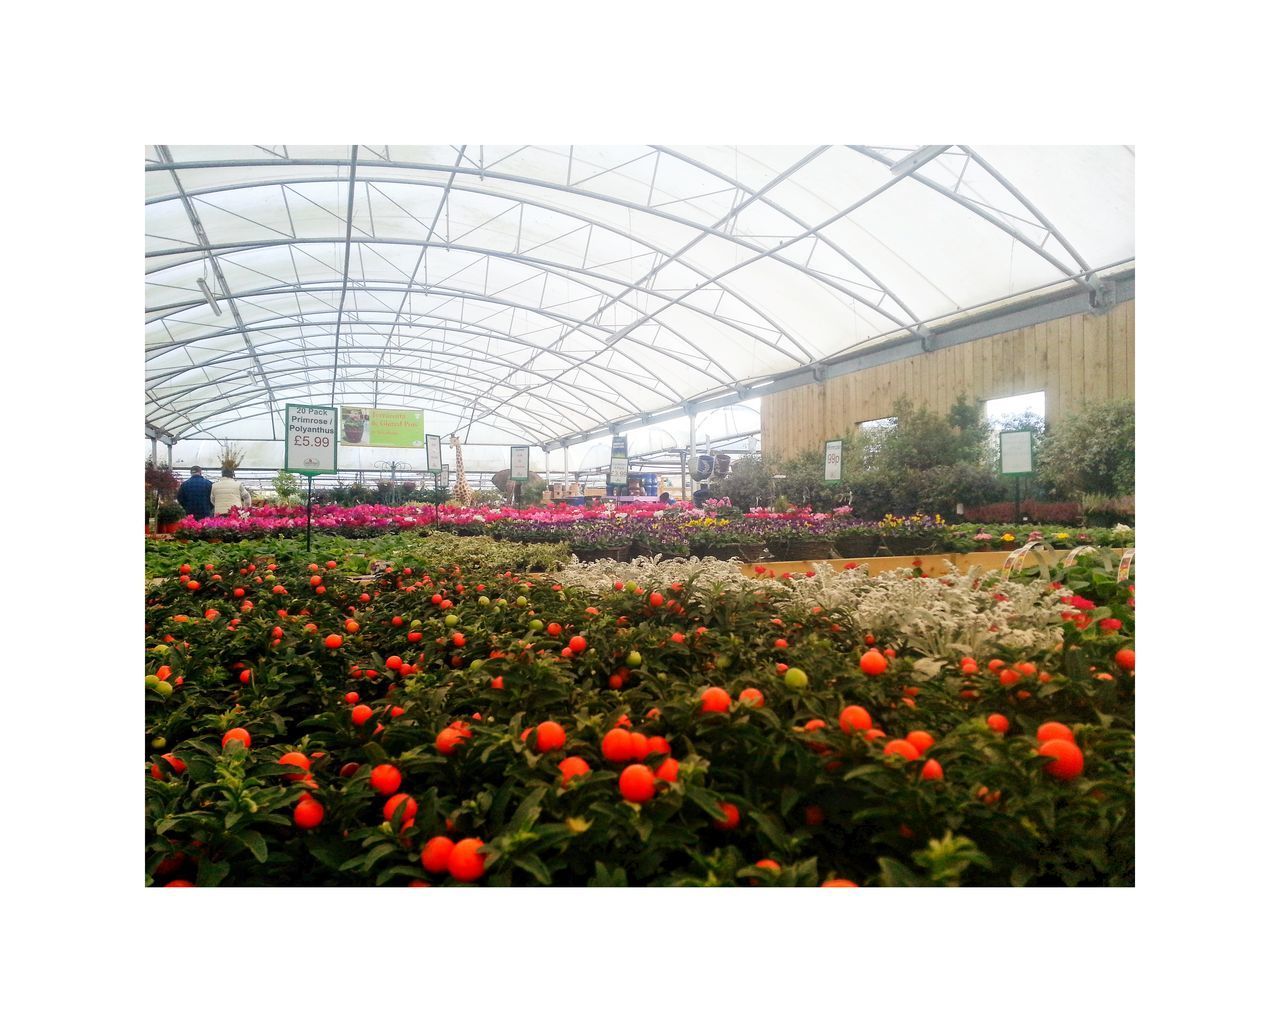 VIEW OF FLOWERS IN GREENHOUSE